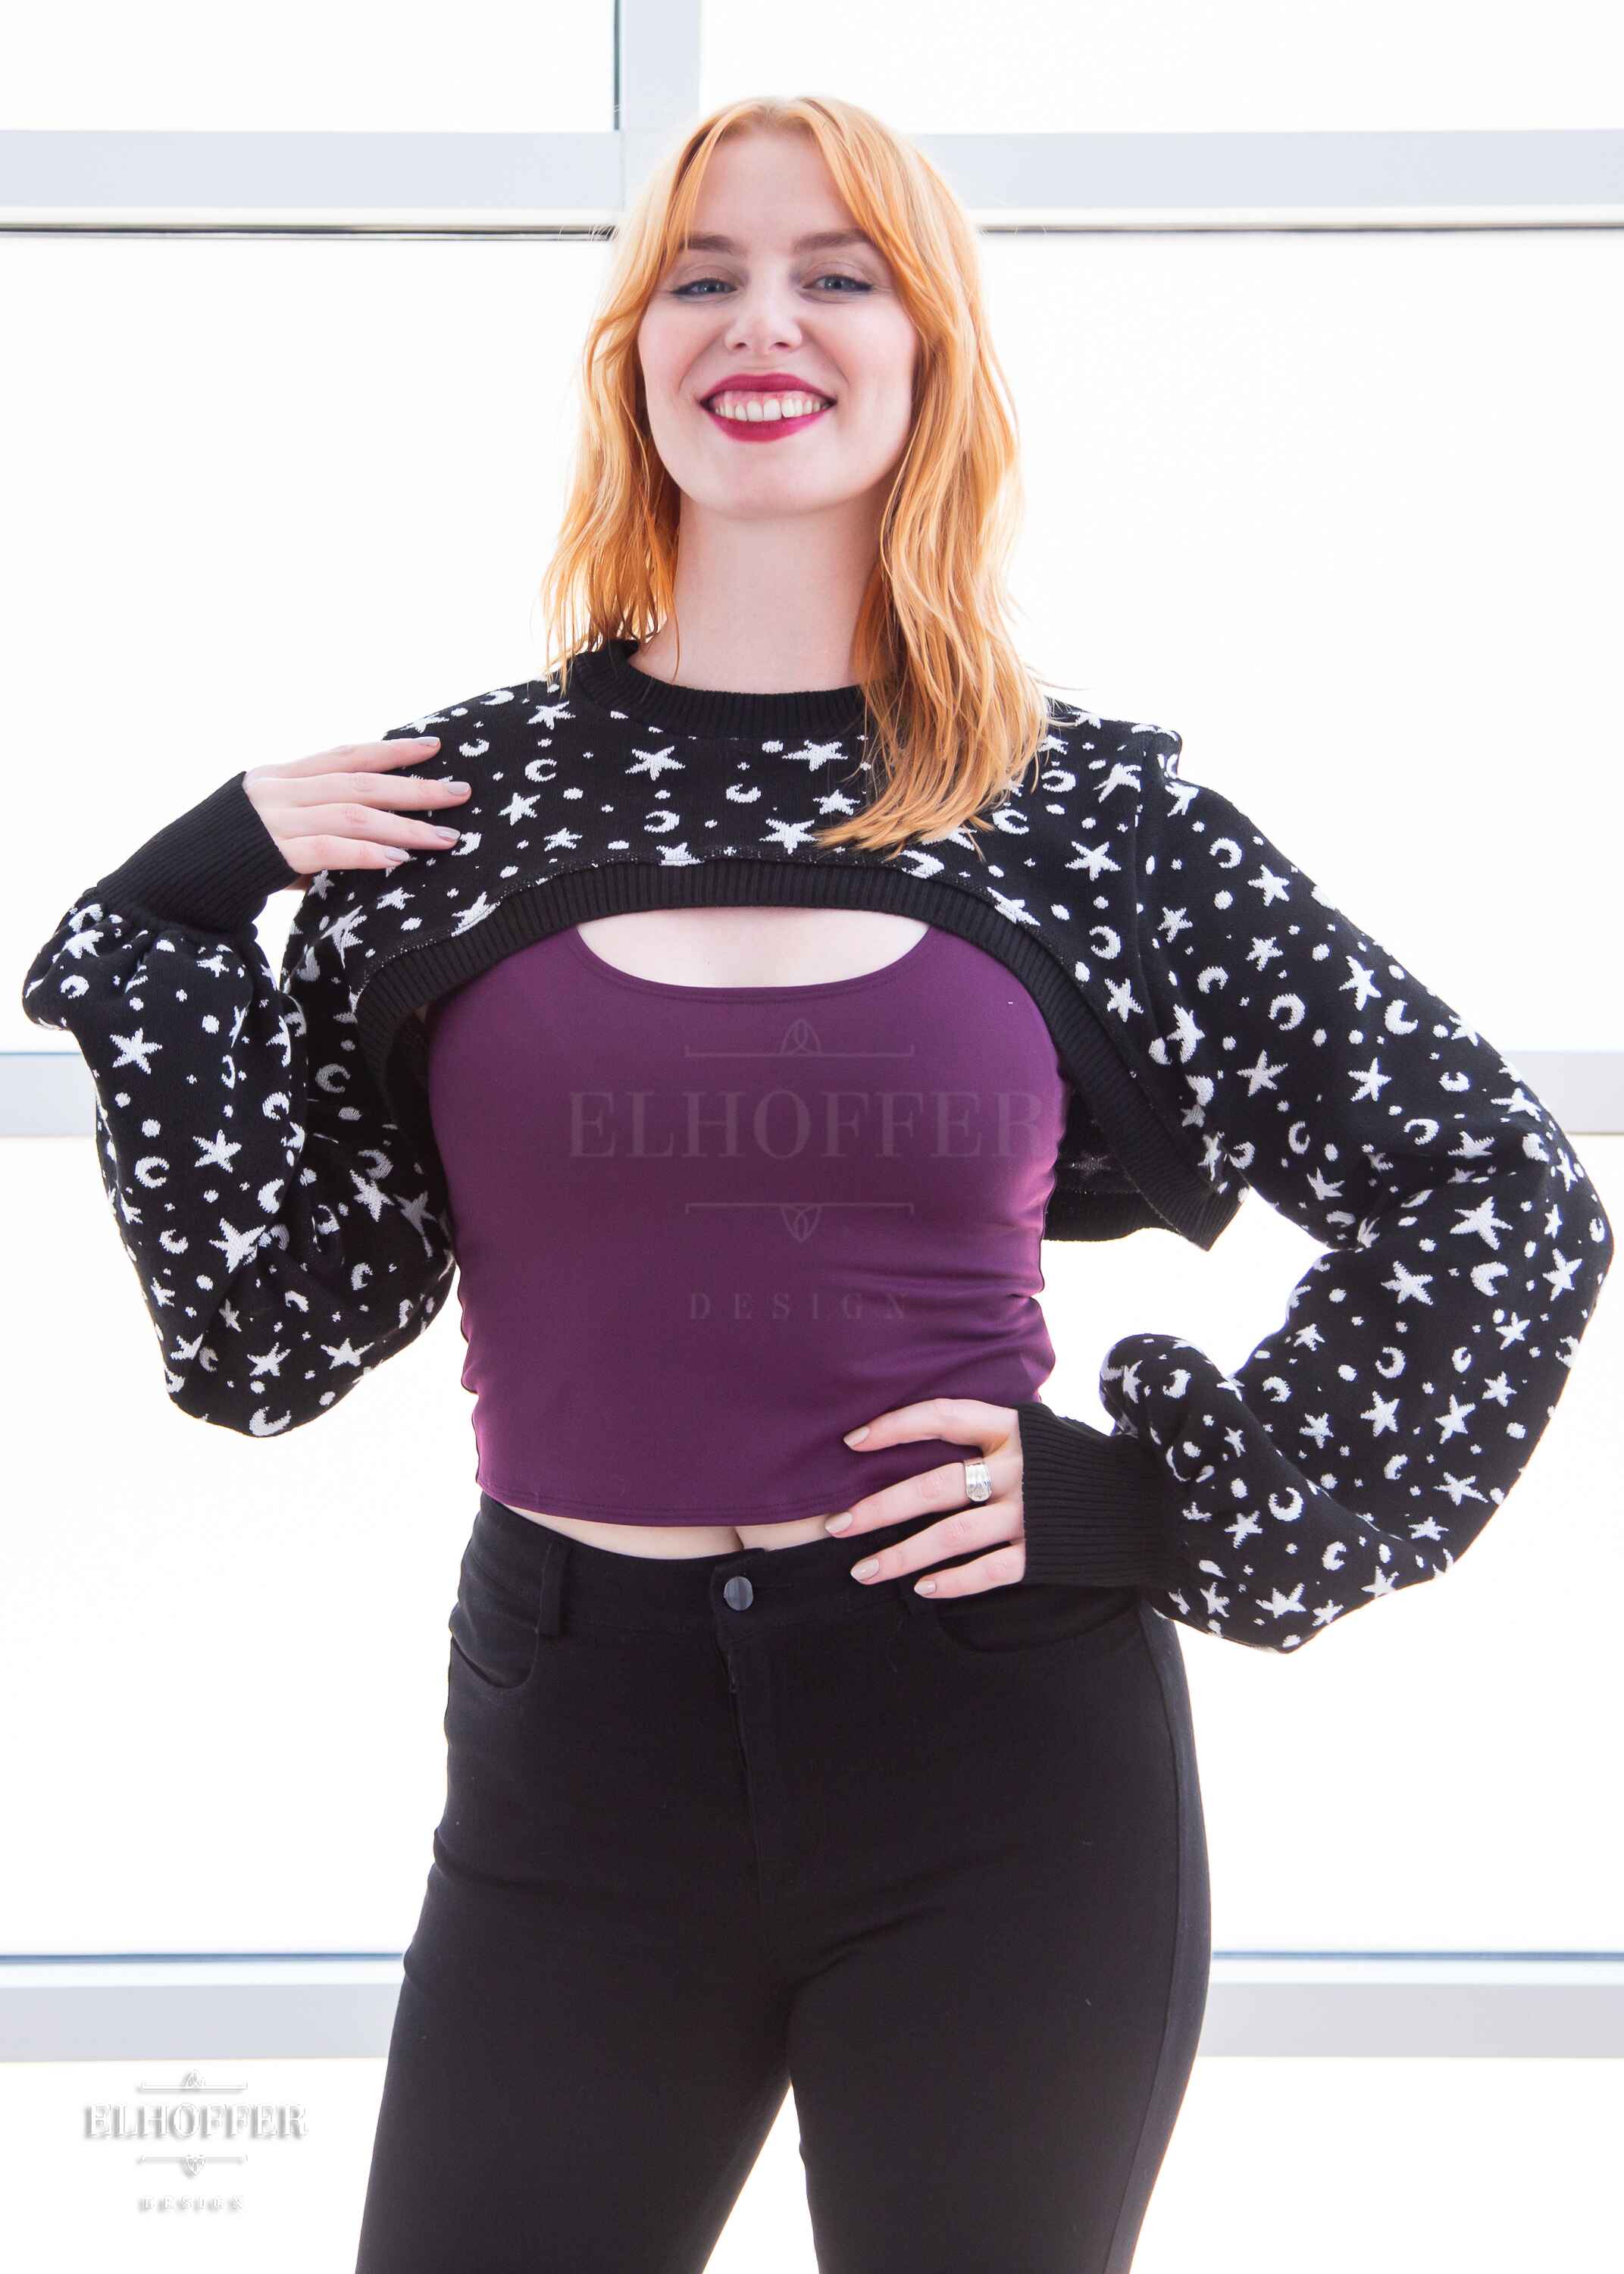 Harley, a fair skinned S model with shoulder length strawberry blond hair, is smiling while wearing the L sample of a black crew neck super cropped knit shrug sweater with a white star and moon pattern, long billowing sleeves and thumbholes. She would order the S for a slightly less oversize look.